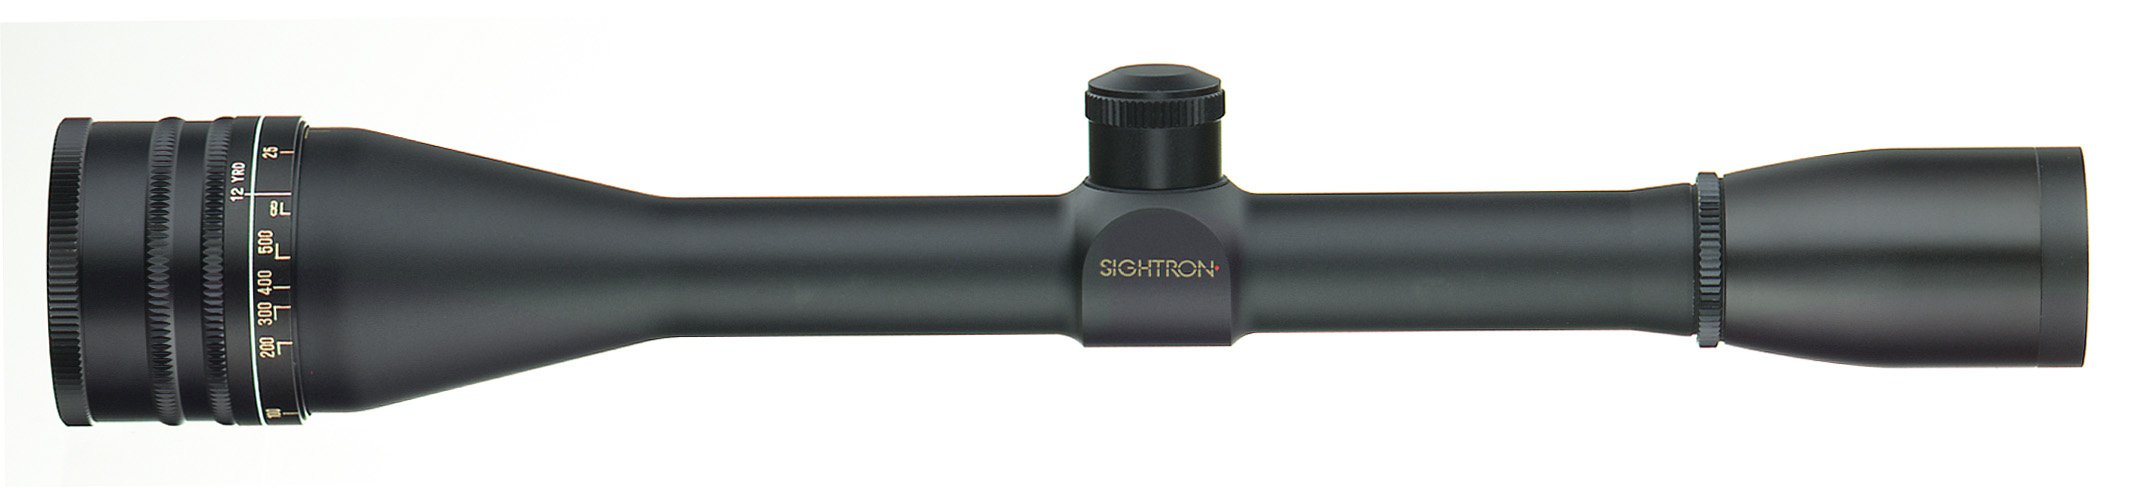 Sightron SII 36x42 Rifle scope with Dot Reticle #301567 - Australian Tactical Precision